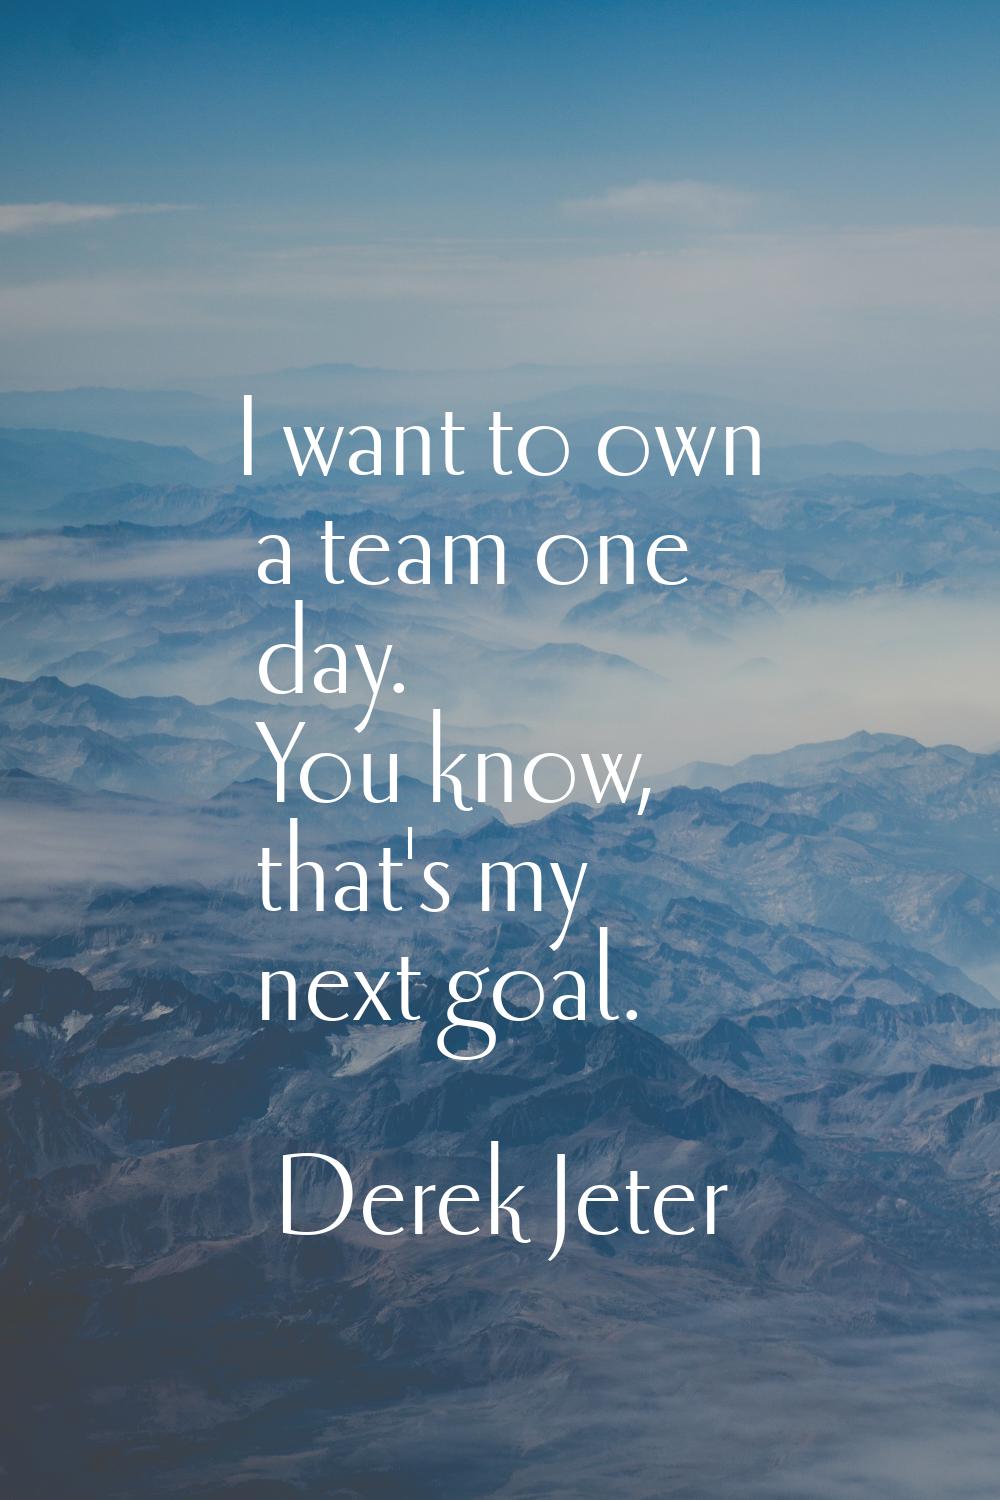 I want to own a team one day. You know, that's my next goal.